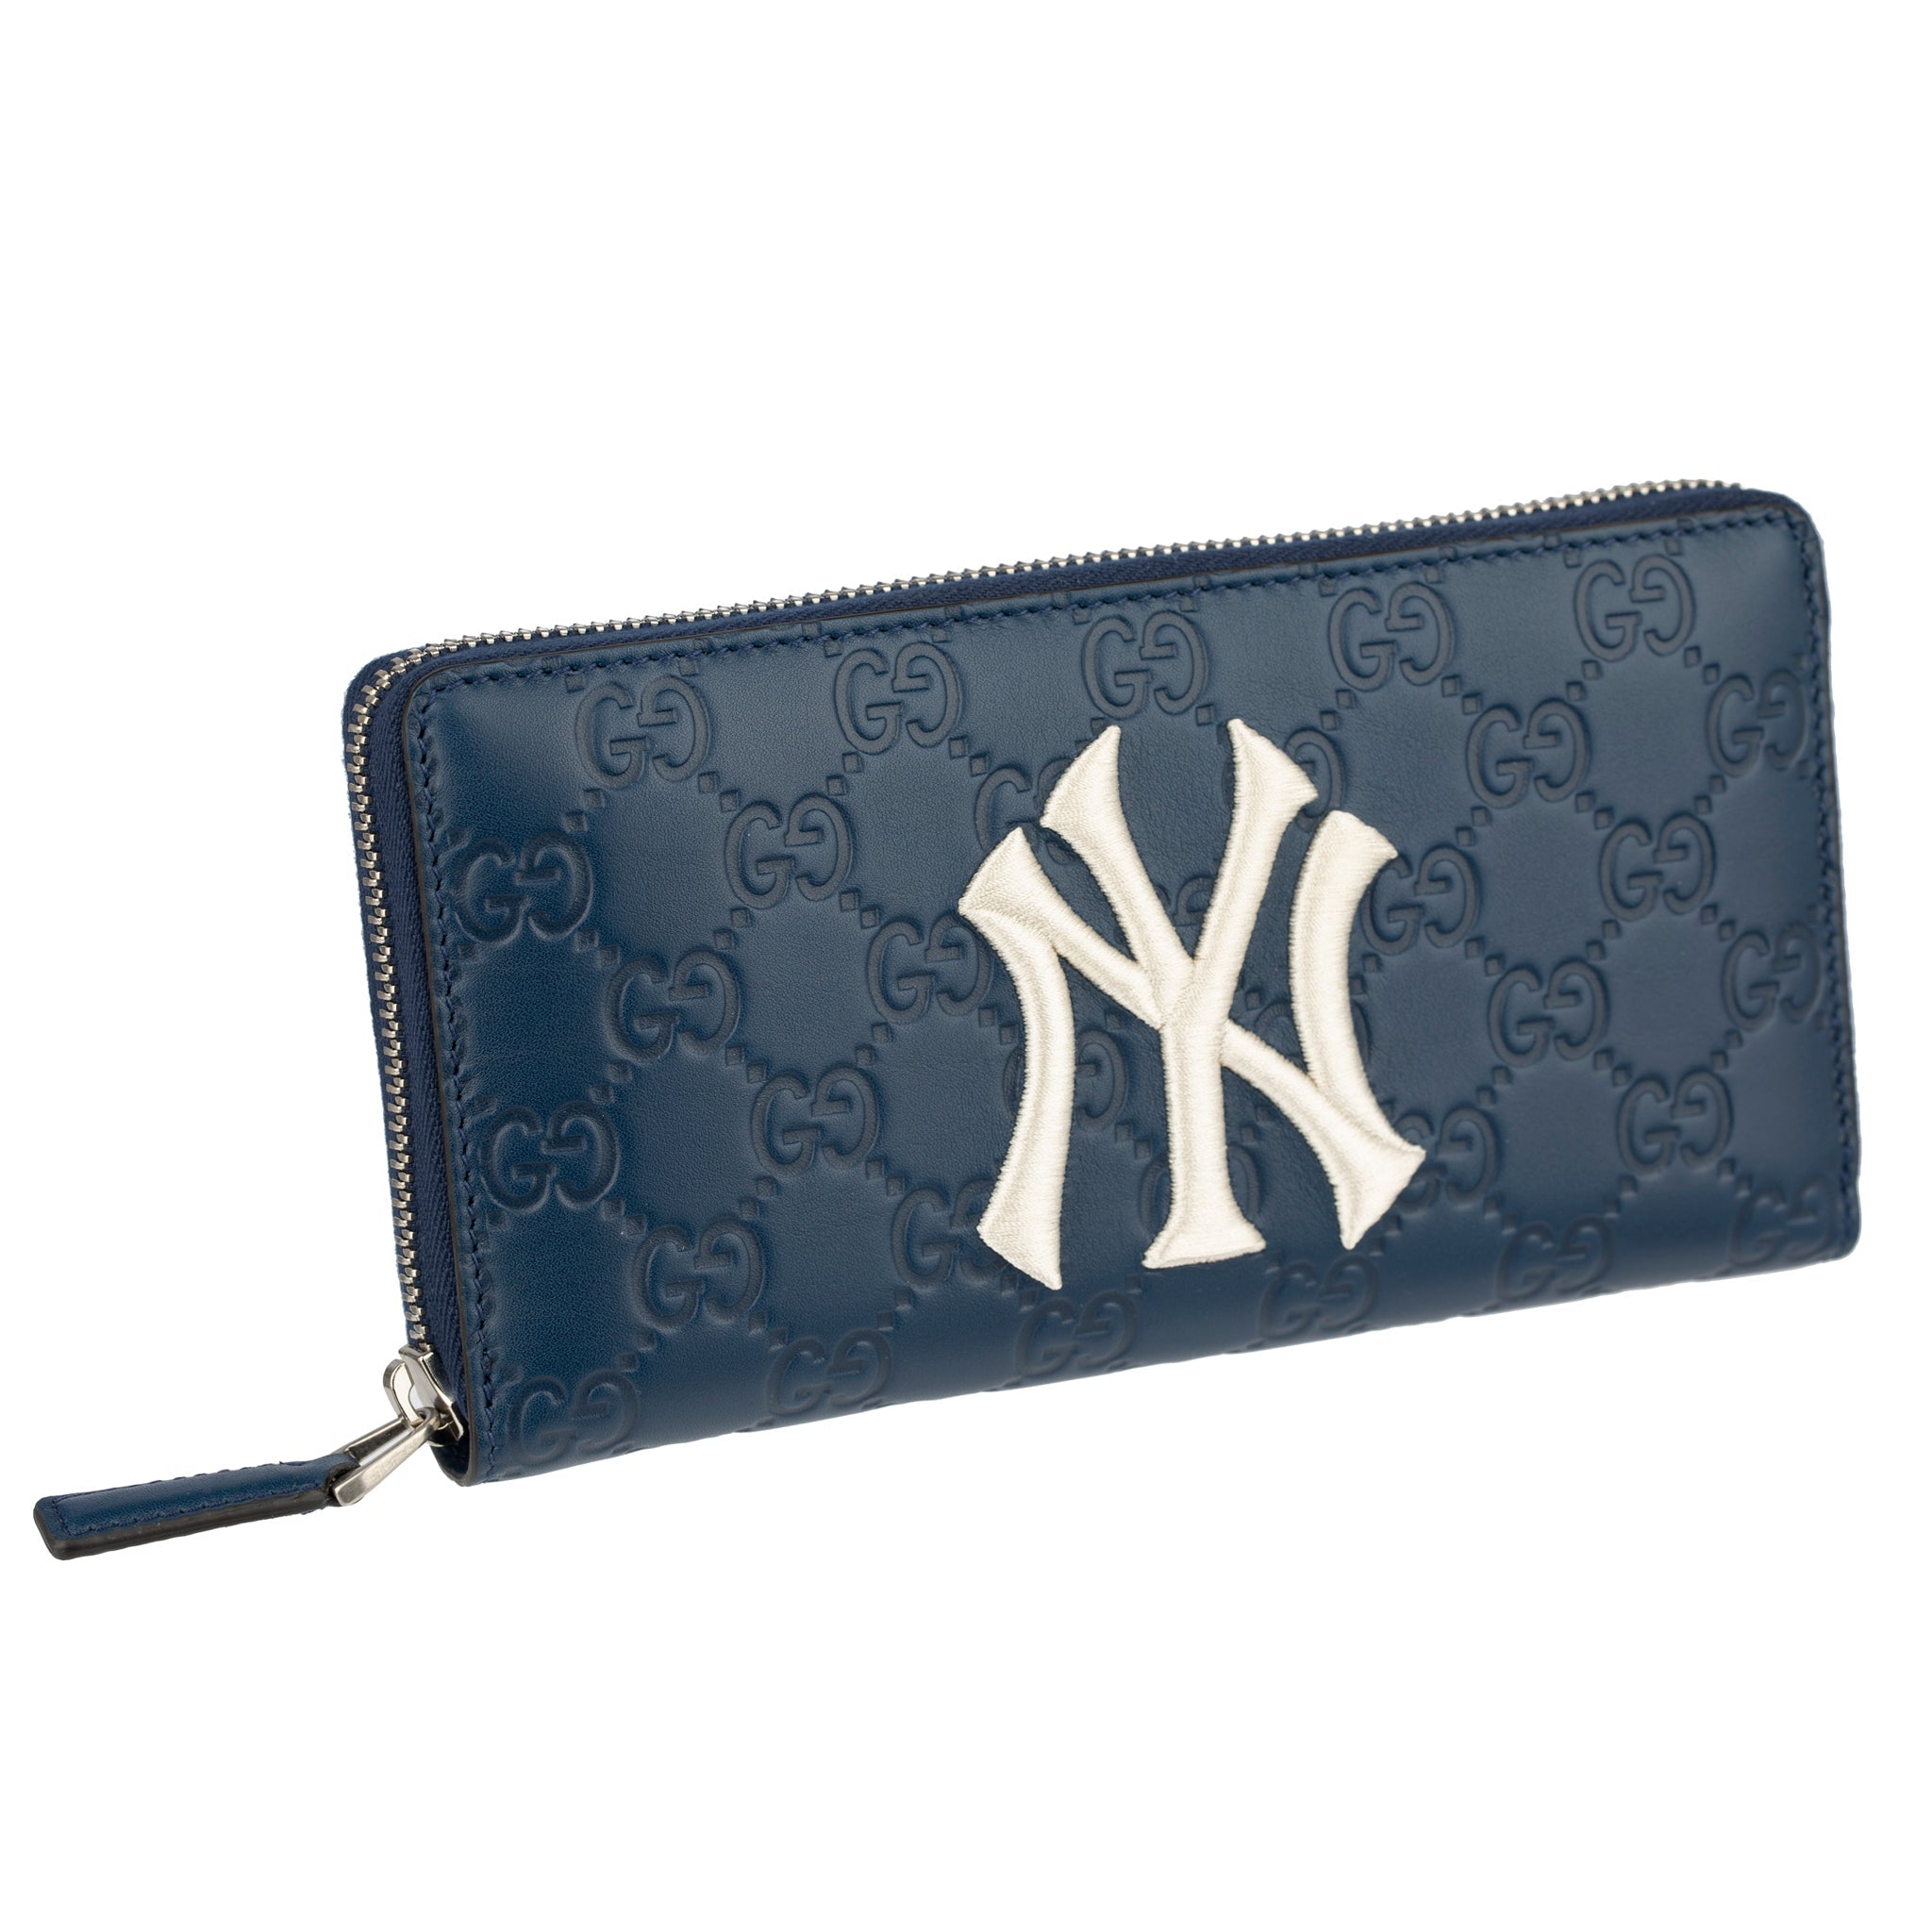 Gucci GG Wallet Navy Leather "NY" New York Yankees Logo - On Repeat